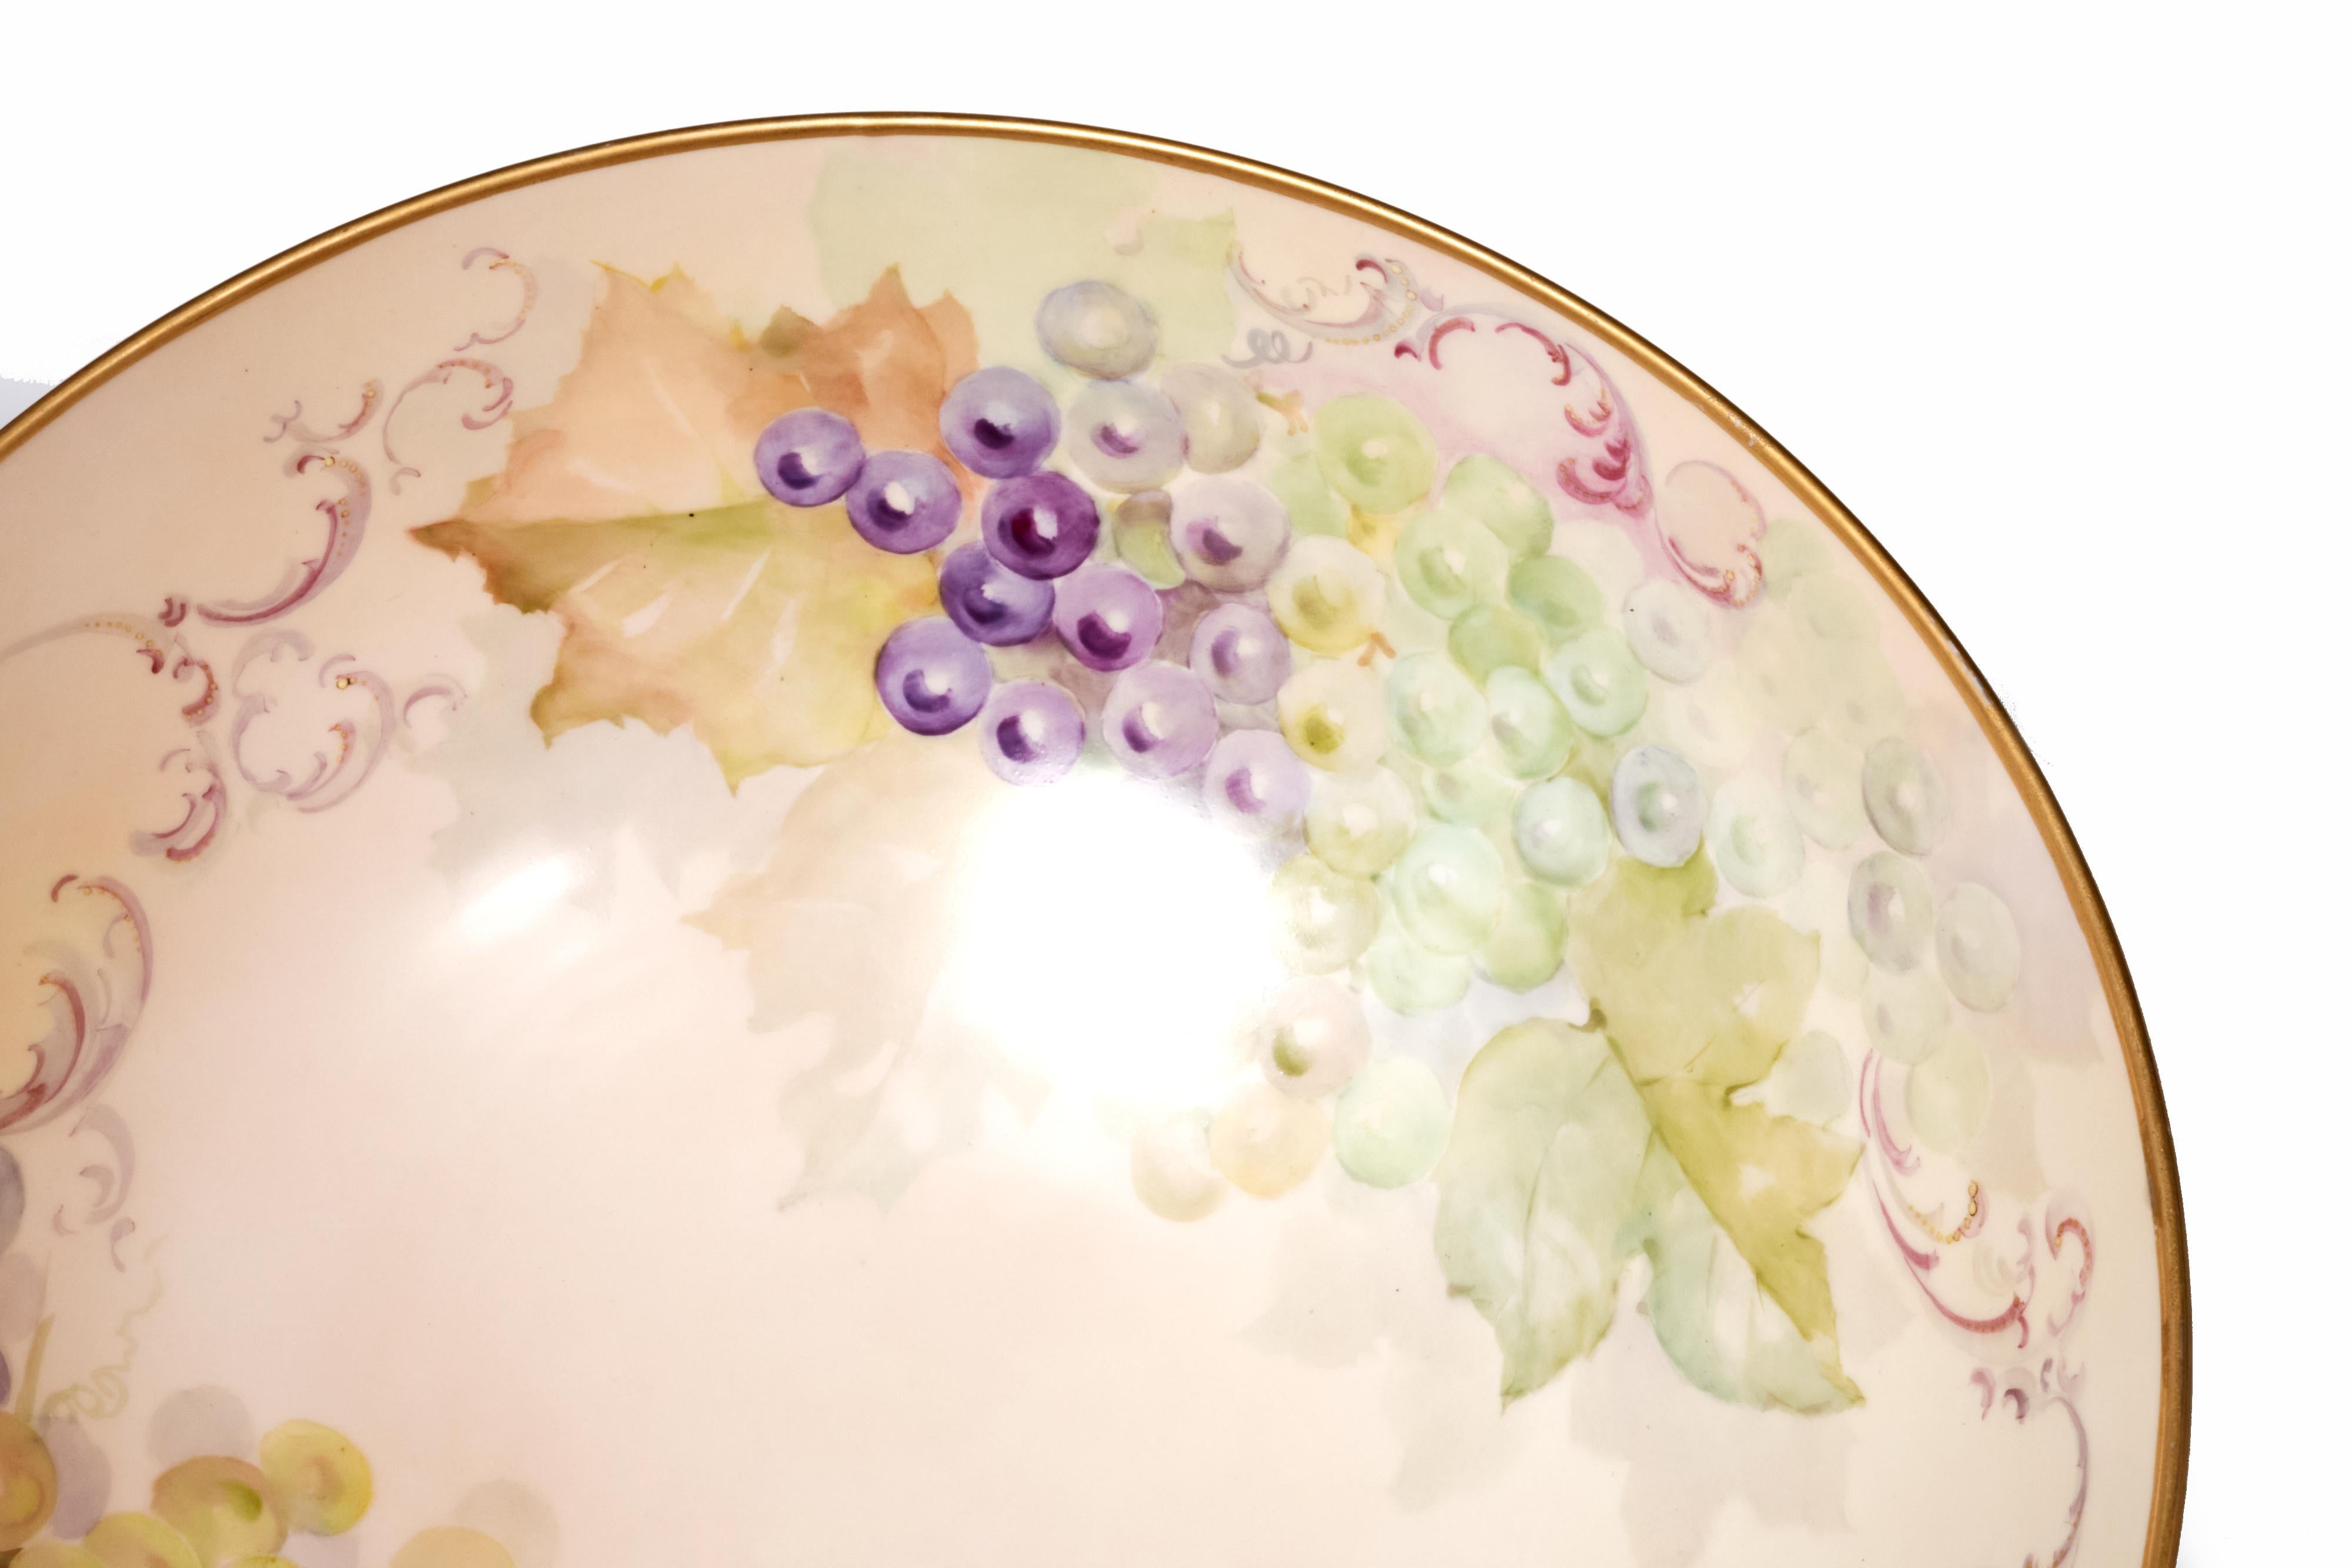 Rare French hand painted porcelain punch bowl with footed porcelain base. Bowl is beautifully decorated with grapes on the interior and florals on the outside. Condition is excellent without chips, cracks or repairs. There is some wear on the gold